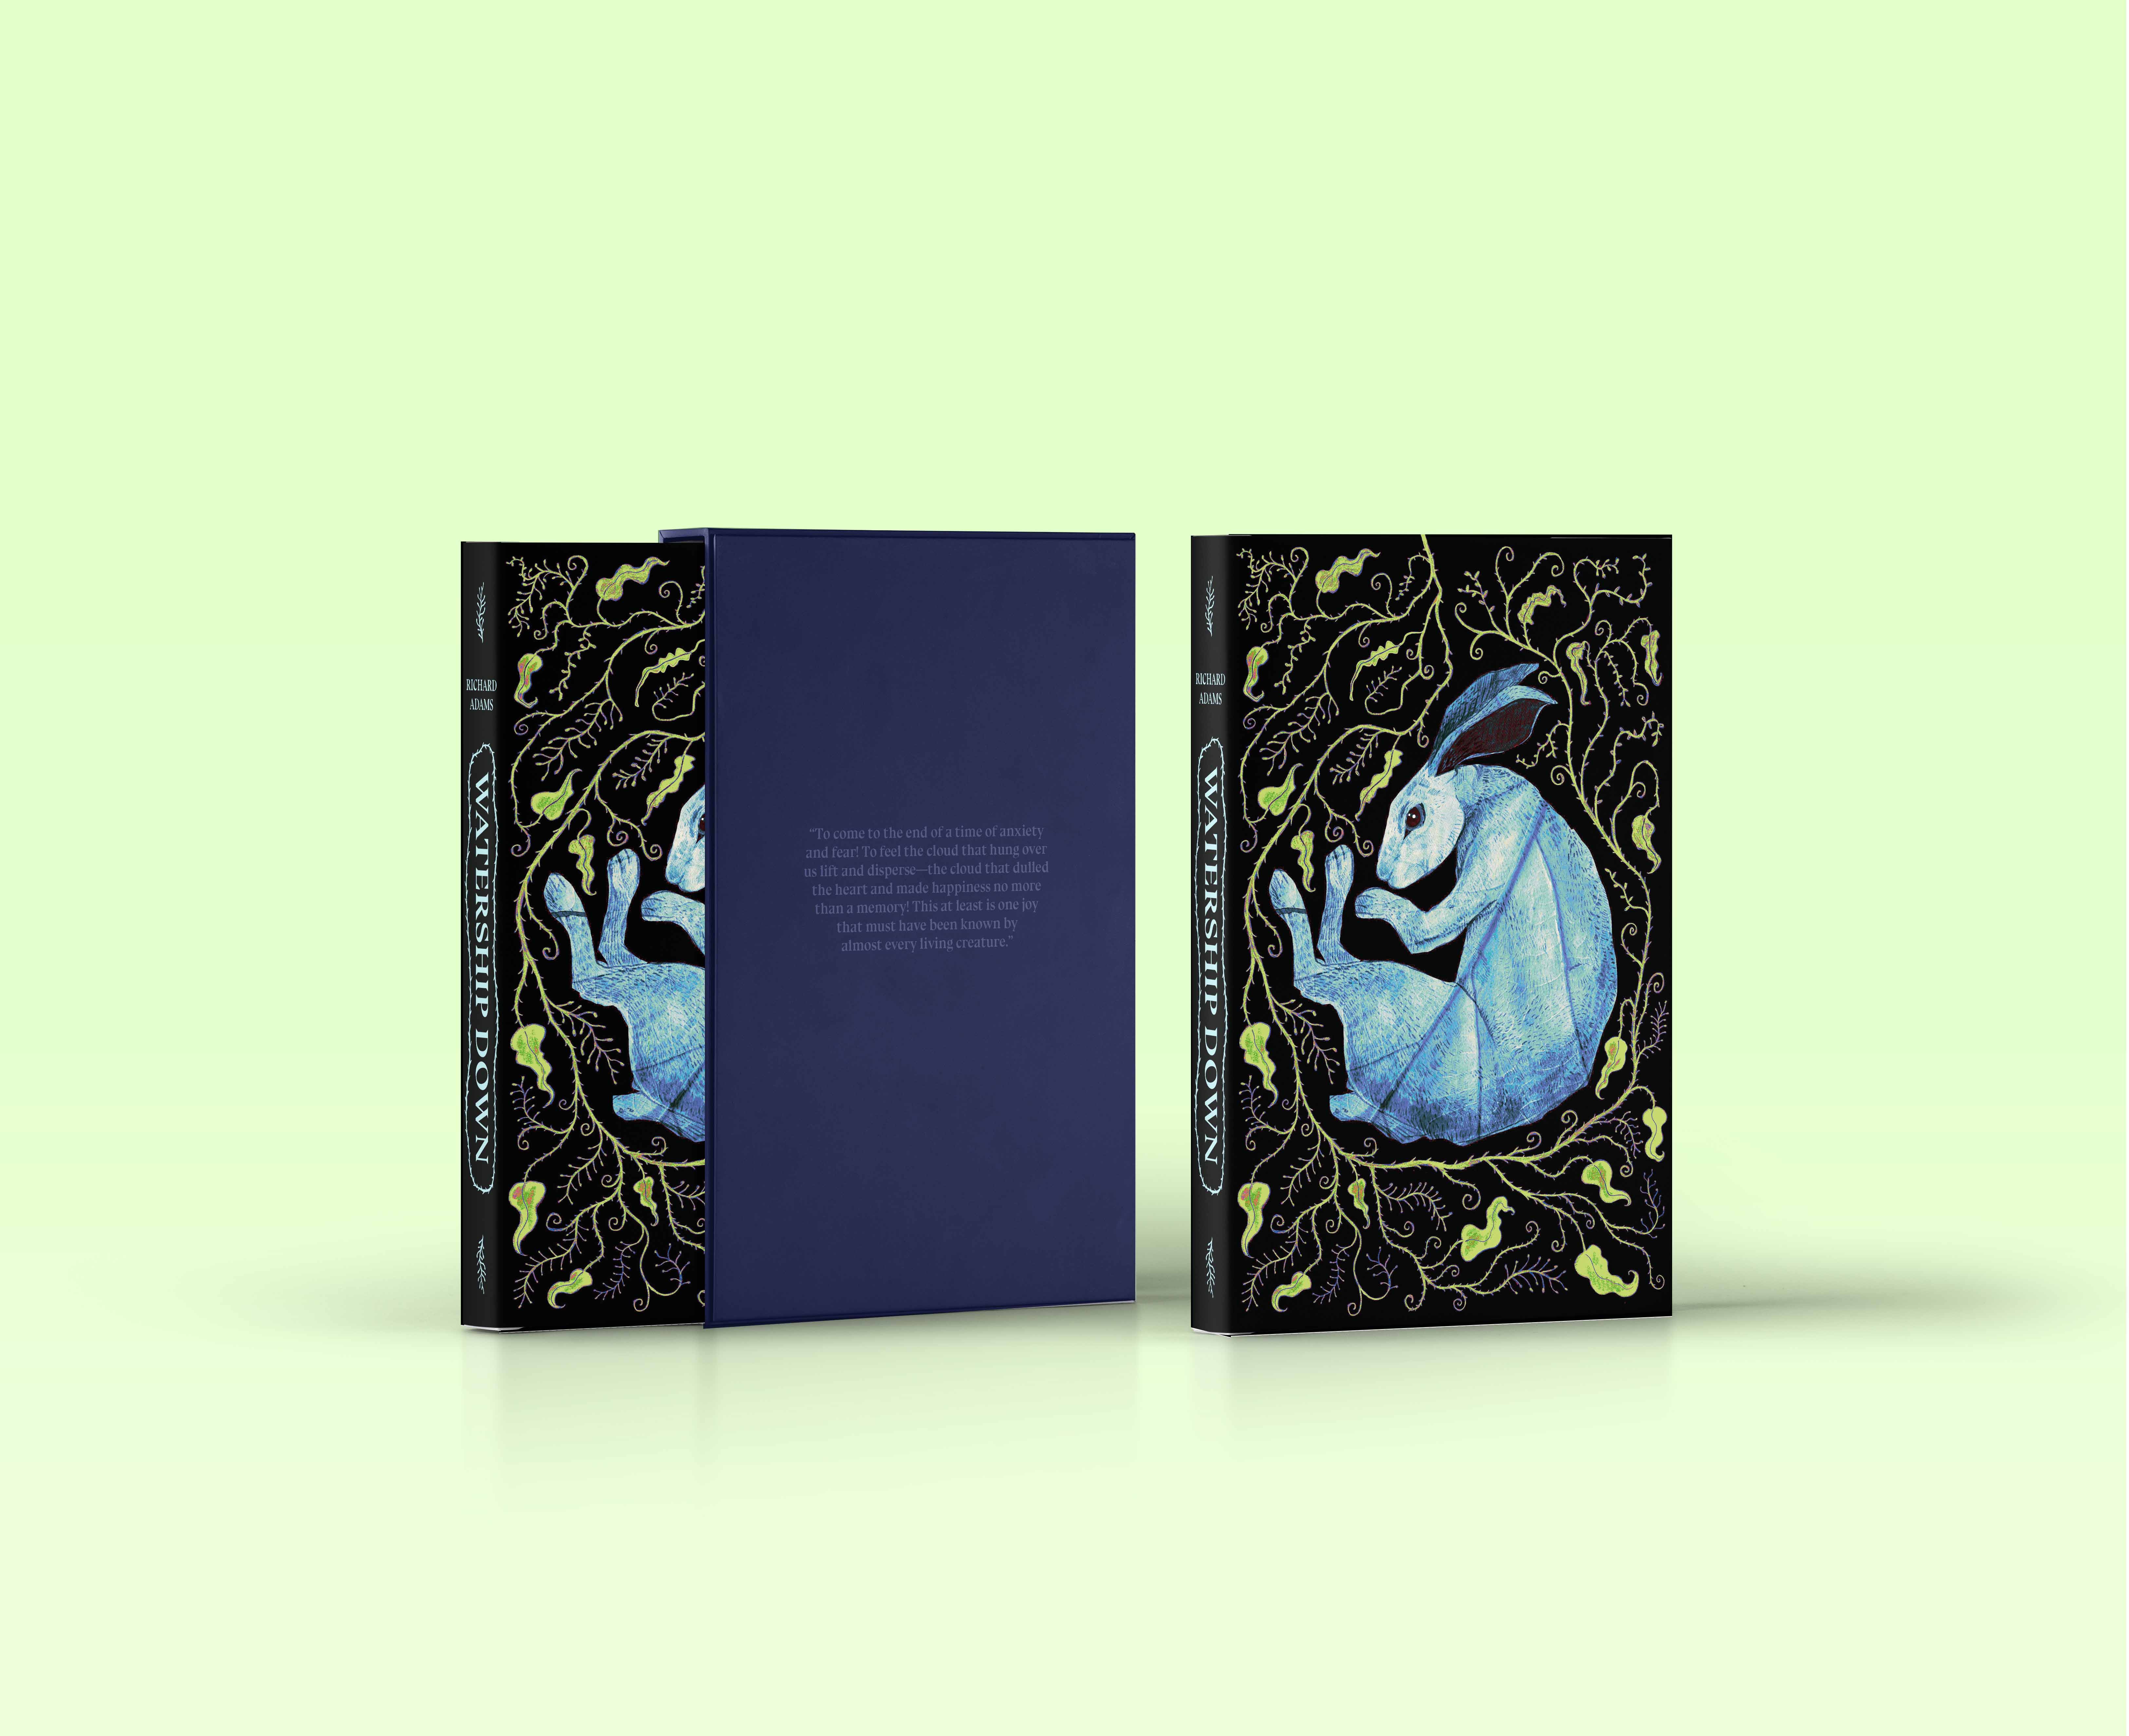 A digital mockup of an illustrated hardback book cover and slip case design for the novel Watership Down, with an illustration of a rabbit on the front.